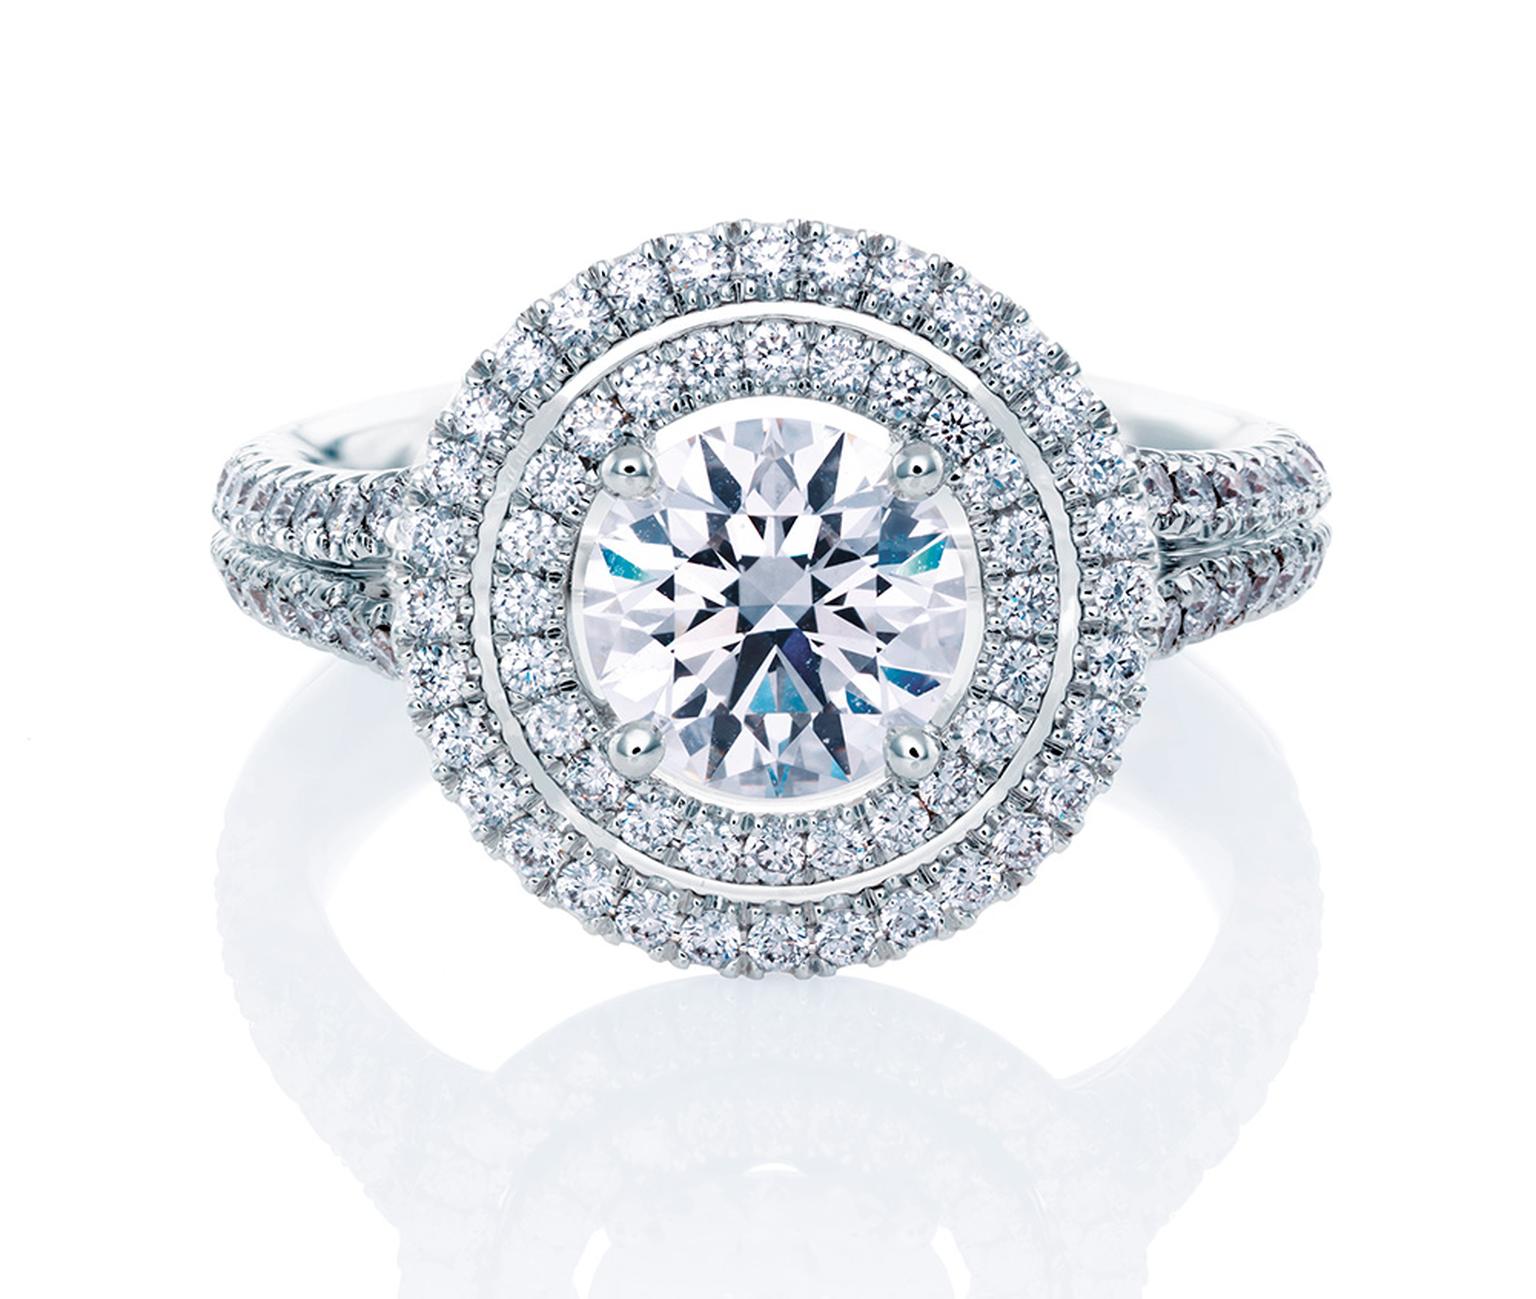 De Beers Aura Double Halo ring in platinum, set with a central round, brilliant-cut diamond and micro pavé diamonds (from: £7,650).